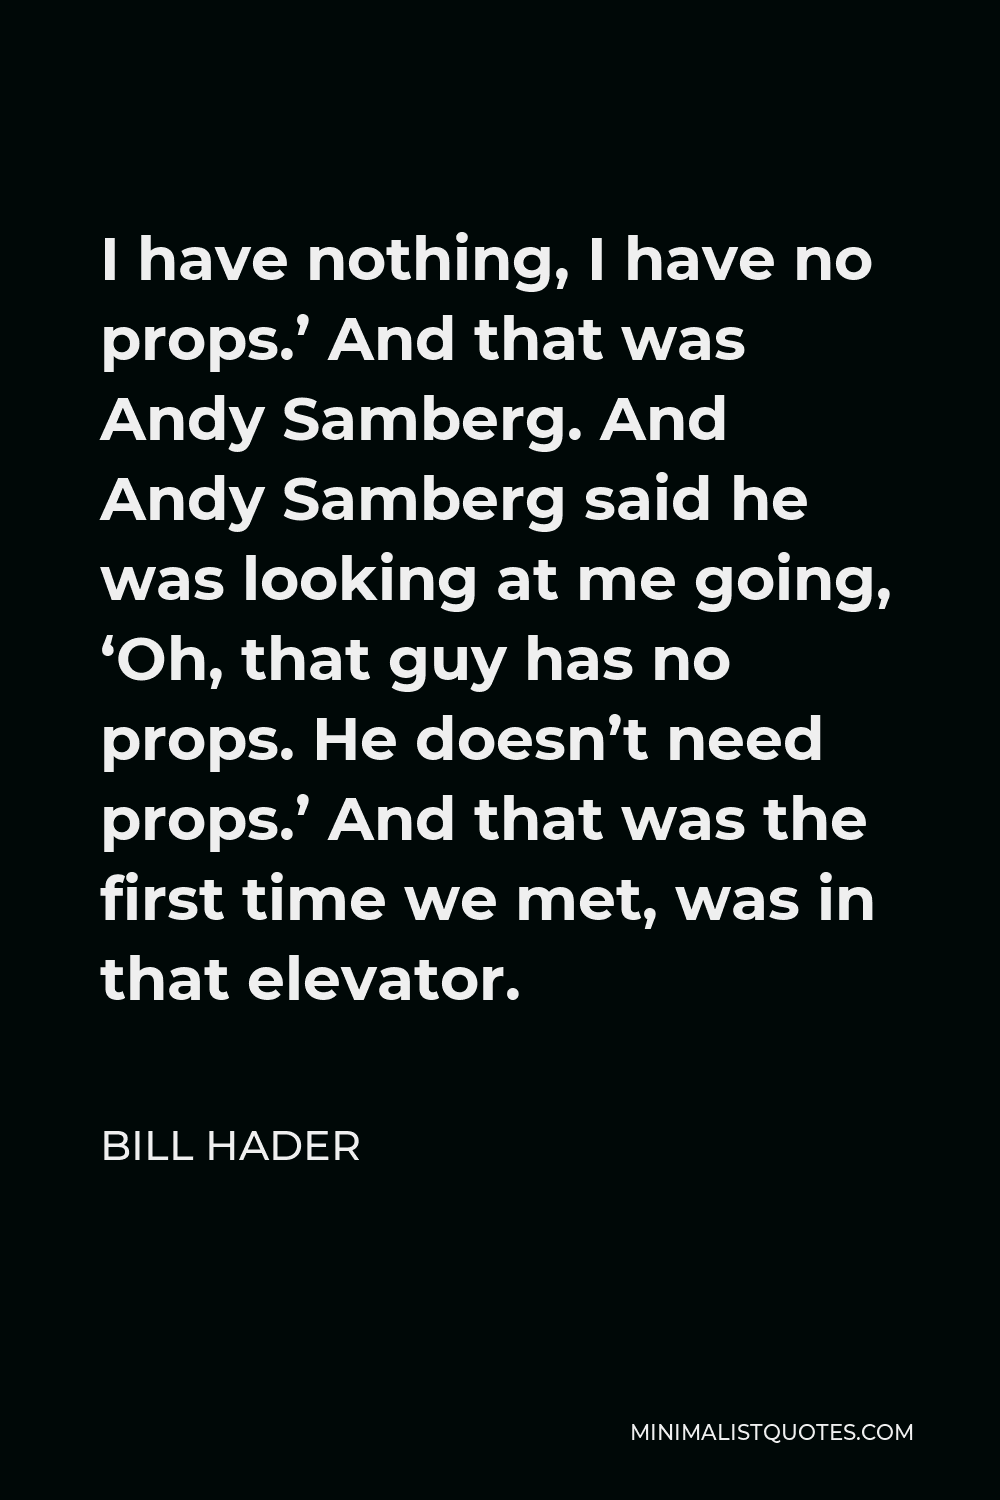 Bill Hader Quote - I have nothing, I have no props.’ And that was Andy Samberg. And Andy Samberg said he was looking at me going, ‘Oh, that guy has no props. He doesn’t need props.’ And that was the first time we met, was in that elevator.